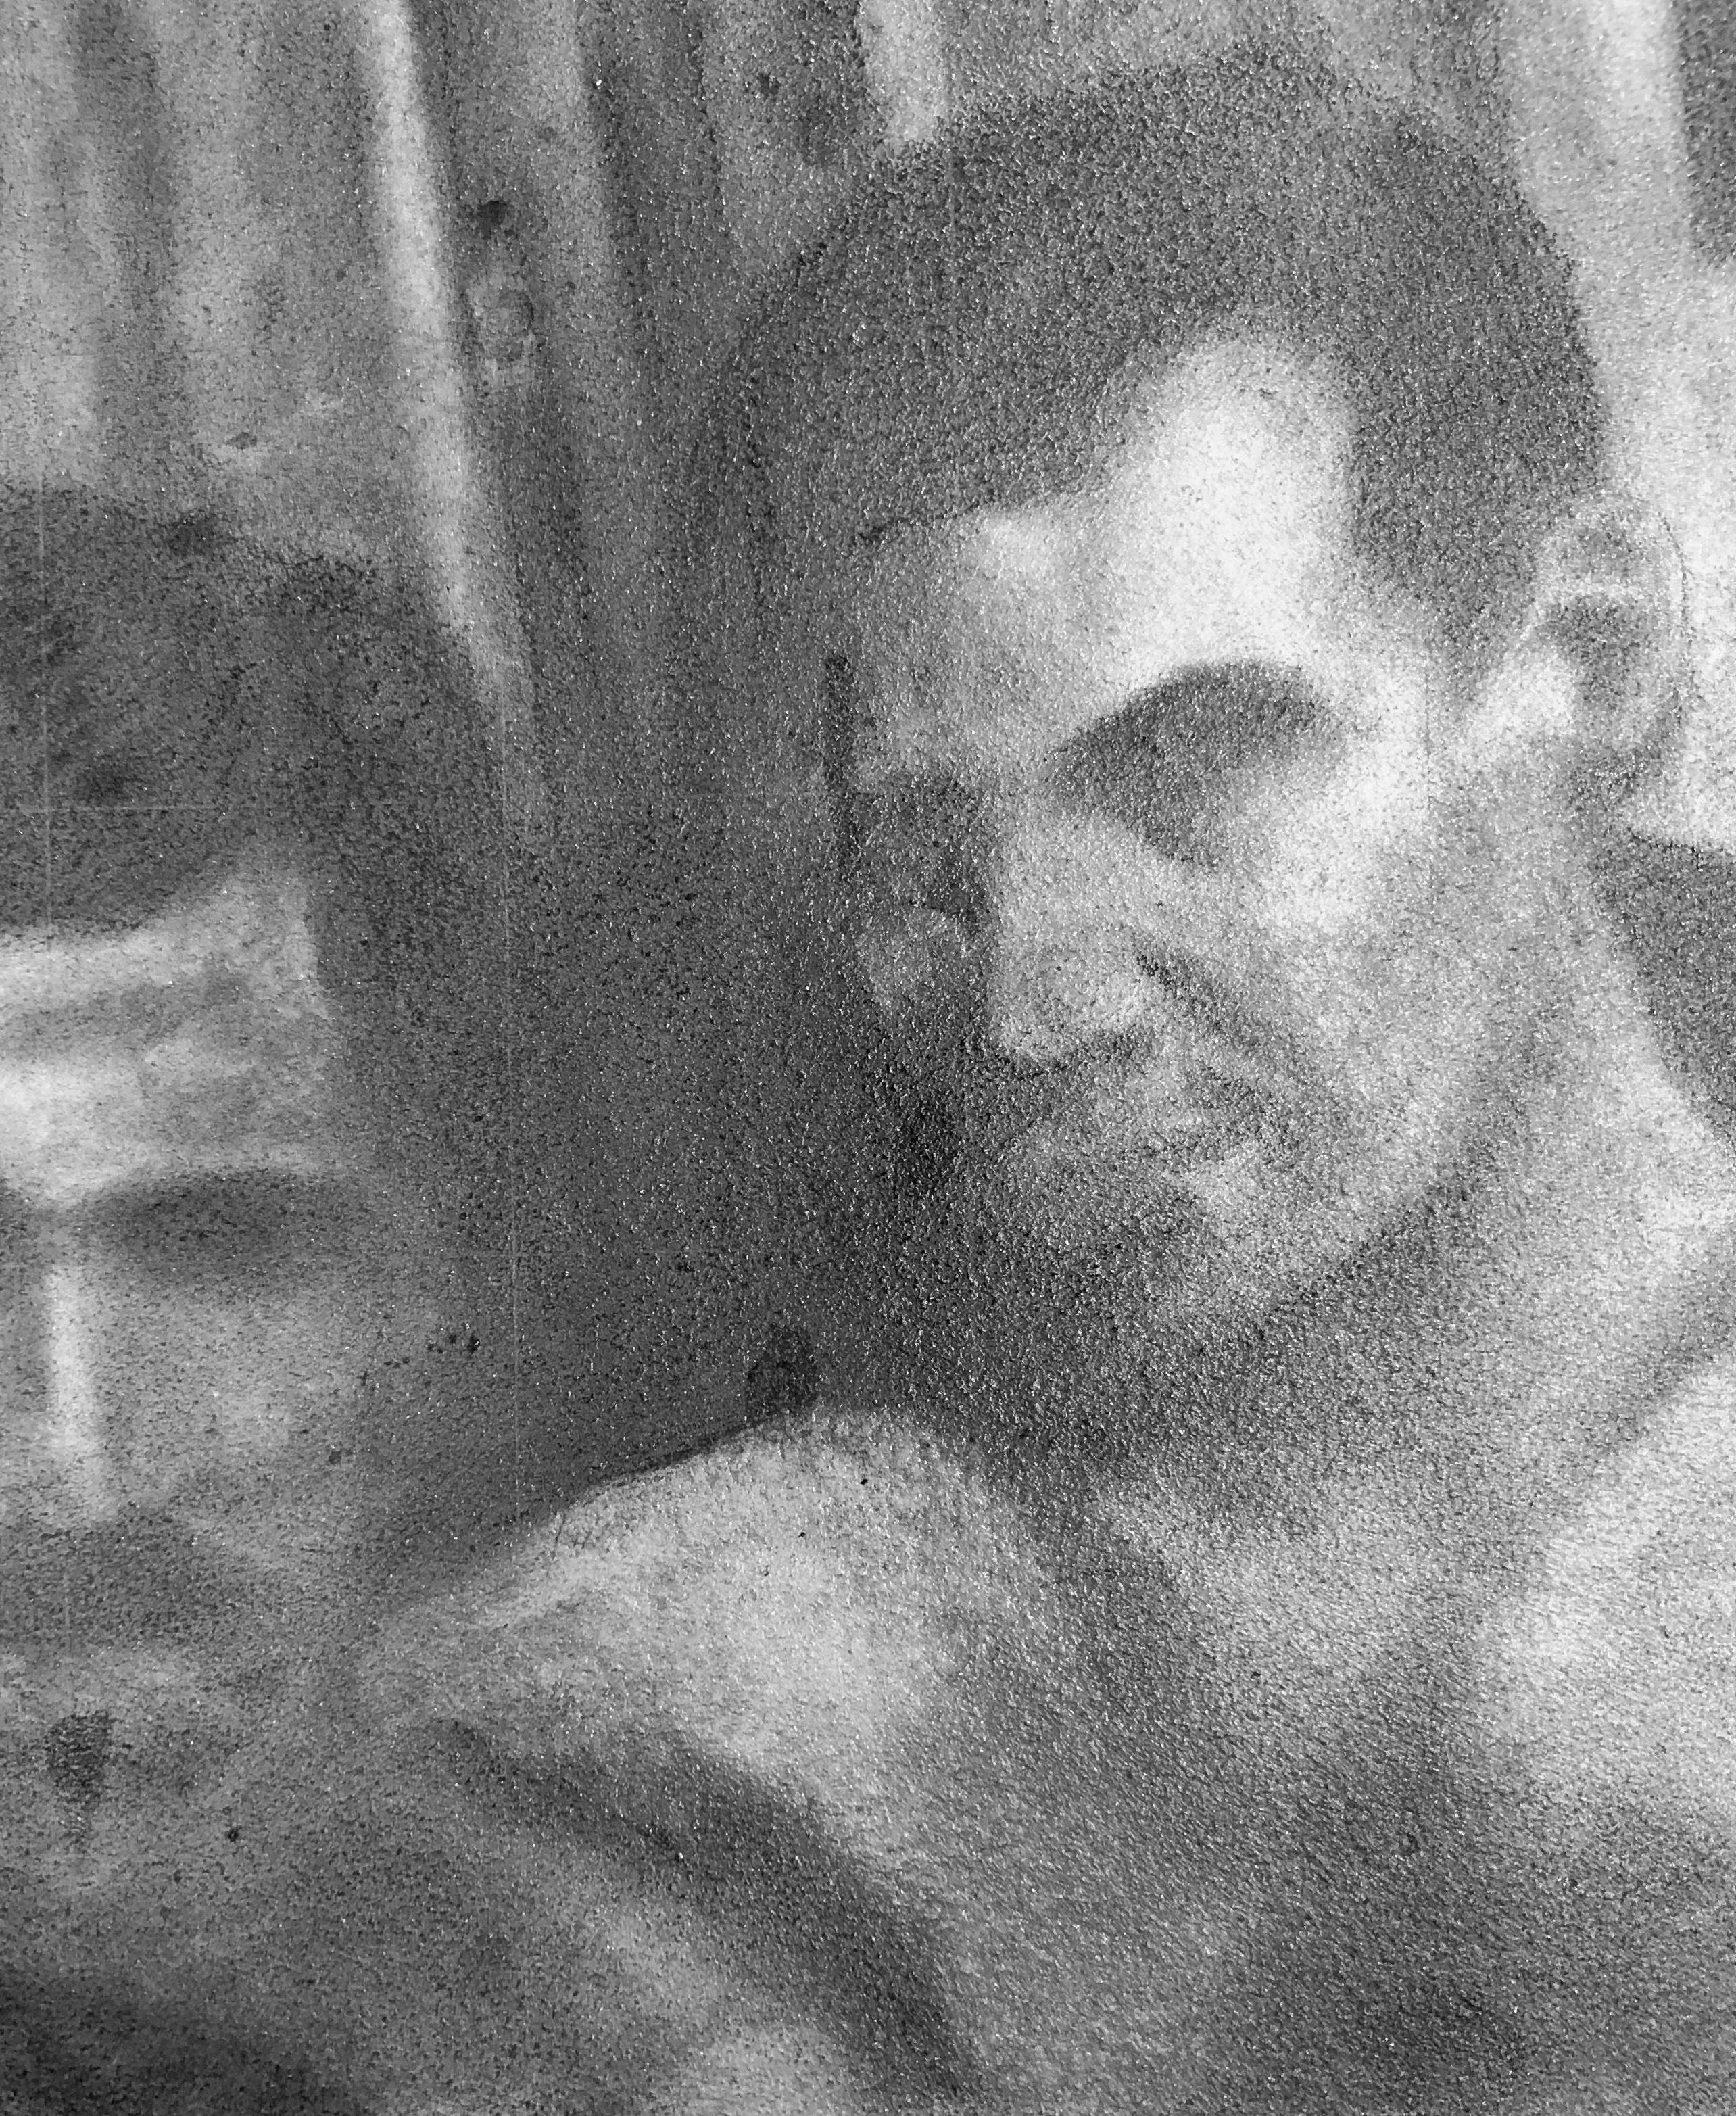 Untitled #1 - Two Male Figures Gaze at Viewer, Original Graphite Drawing - Contemporary Art by Rick Sindt